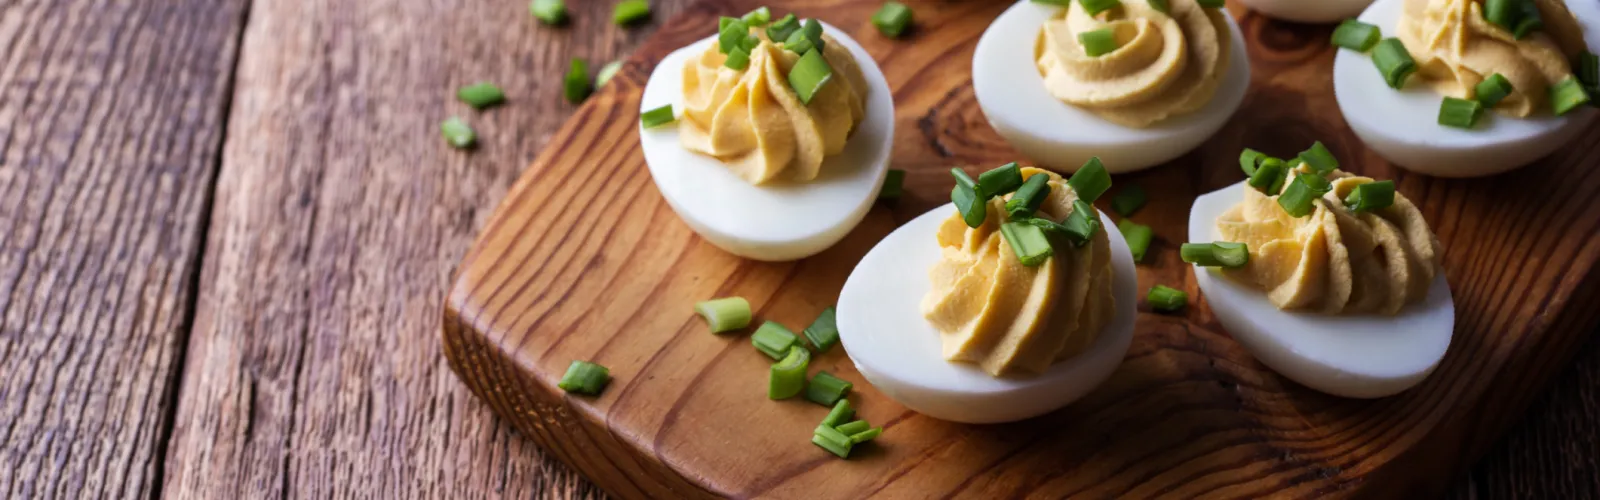 a plate of deviled eggs on a wooden table